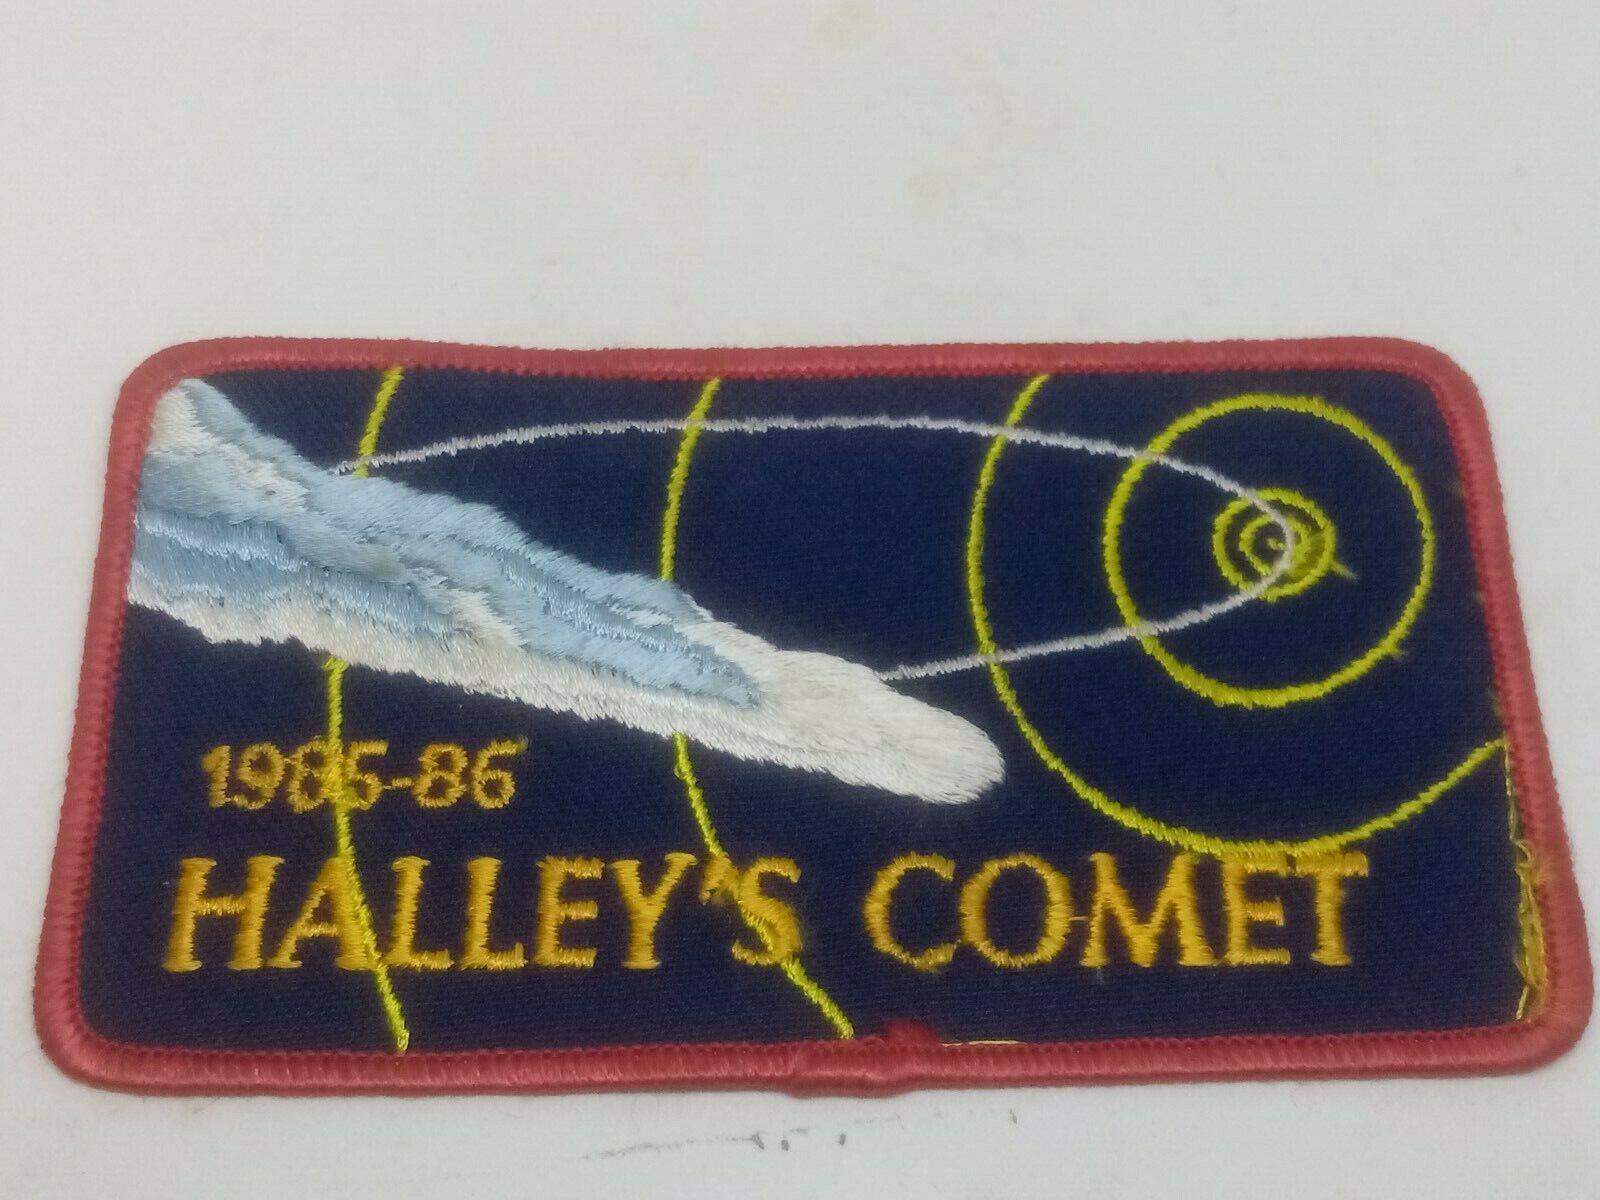 Vintage 1985-86 HALLEY’S COMET Embroidered Cloth Patch Badge As Seen 